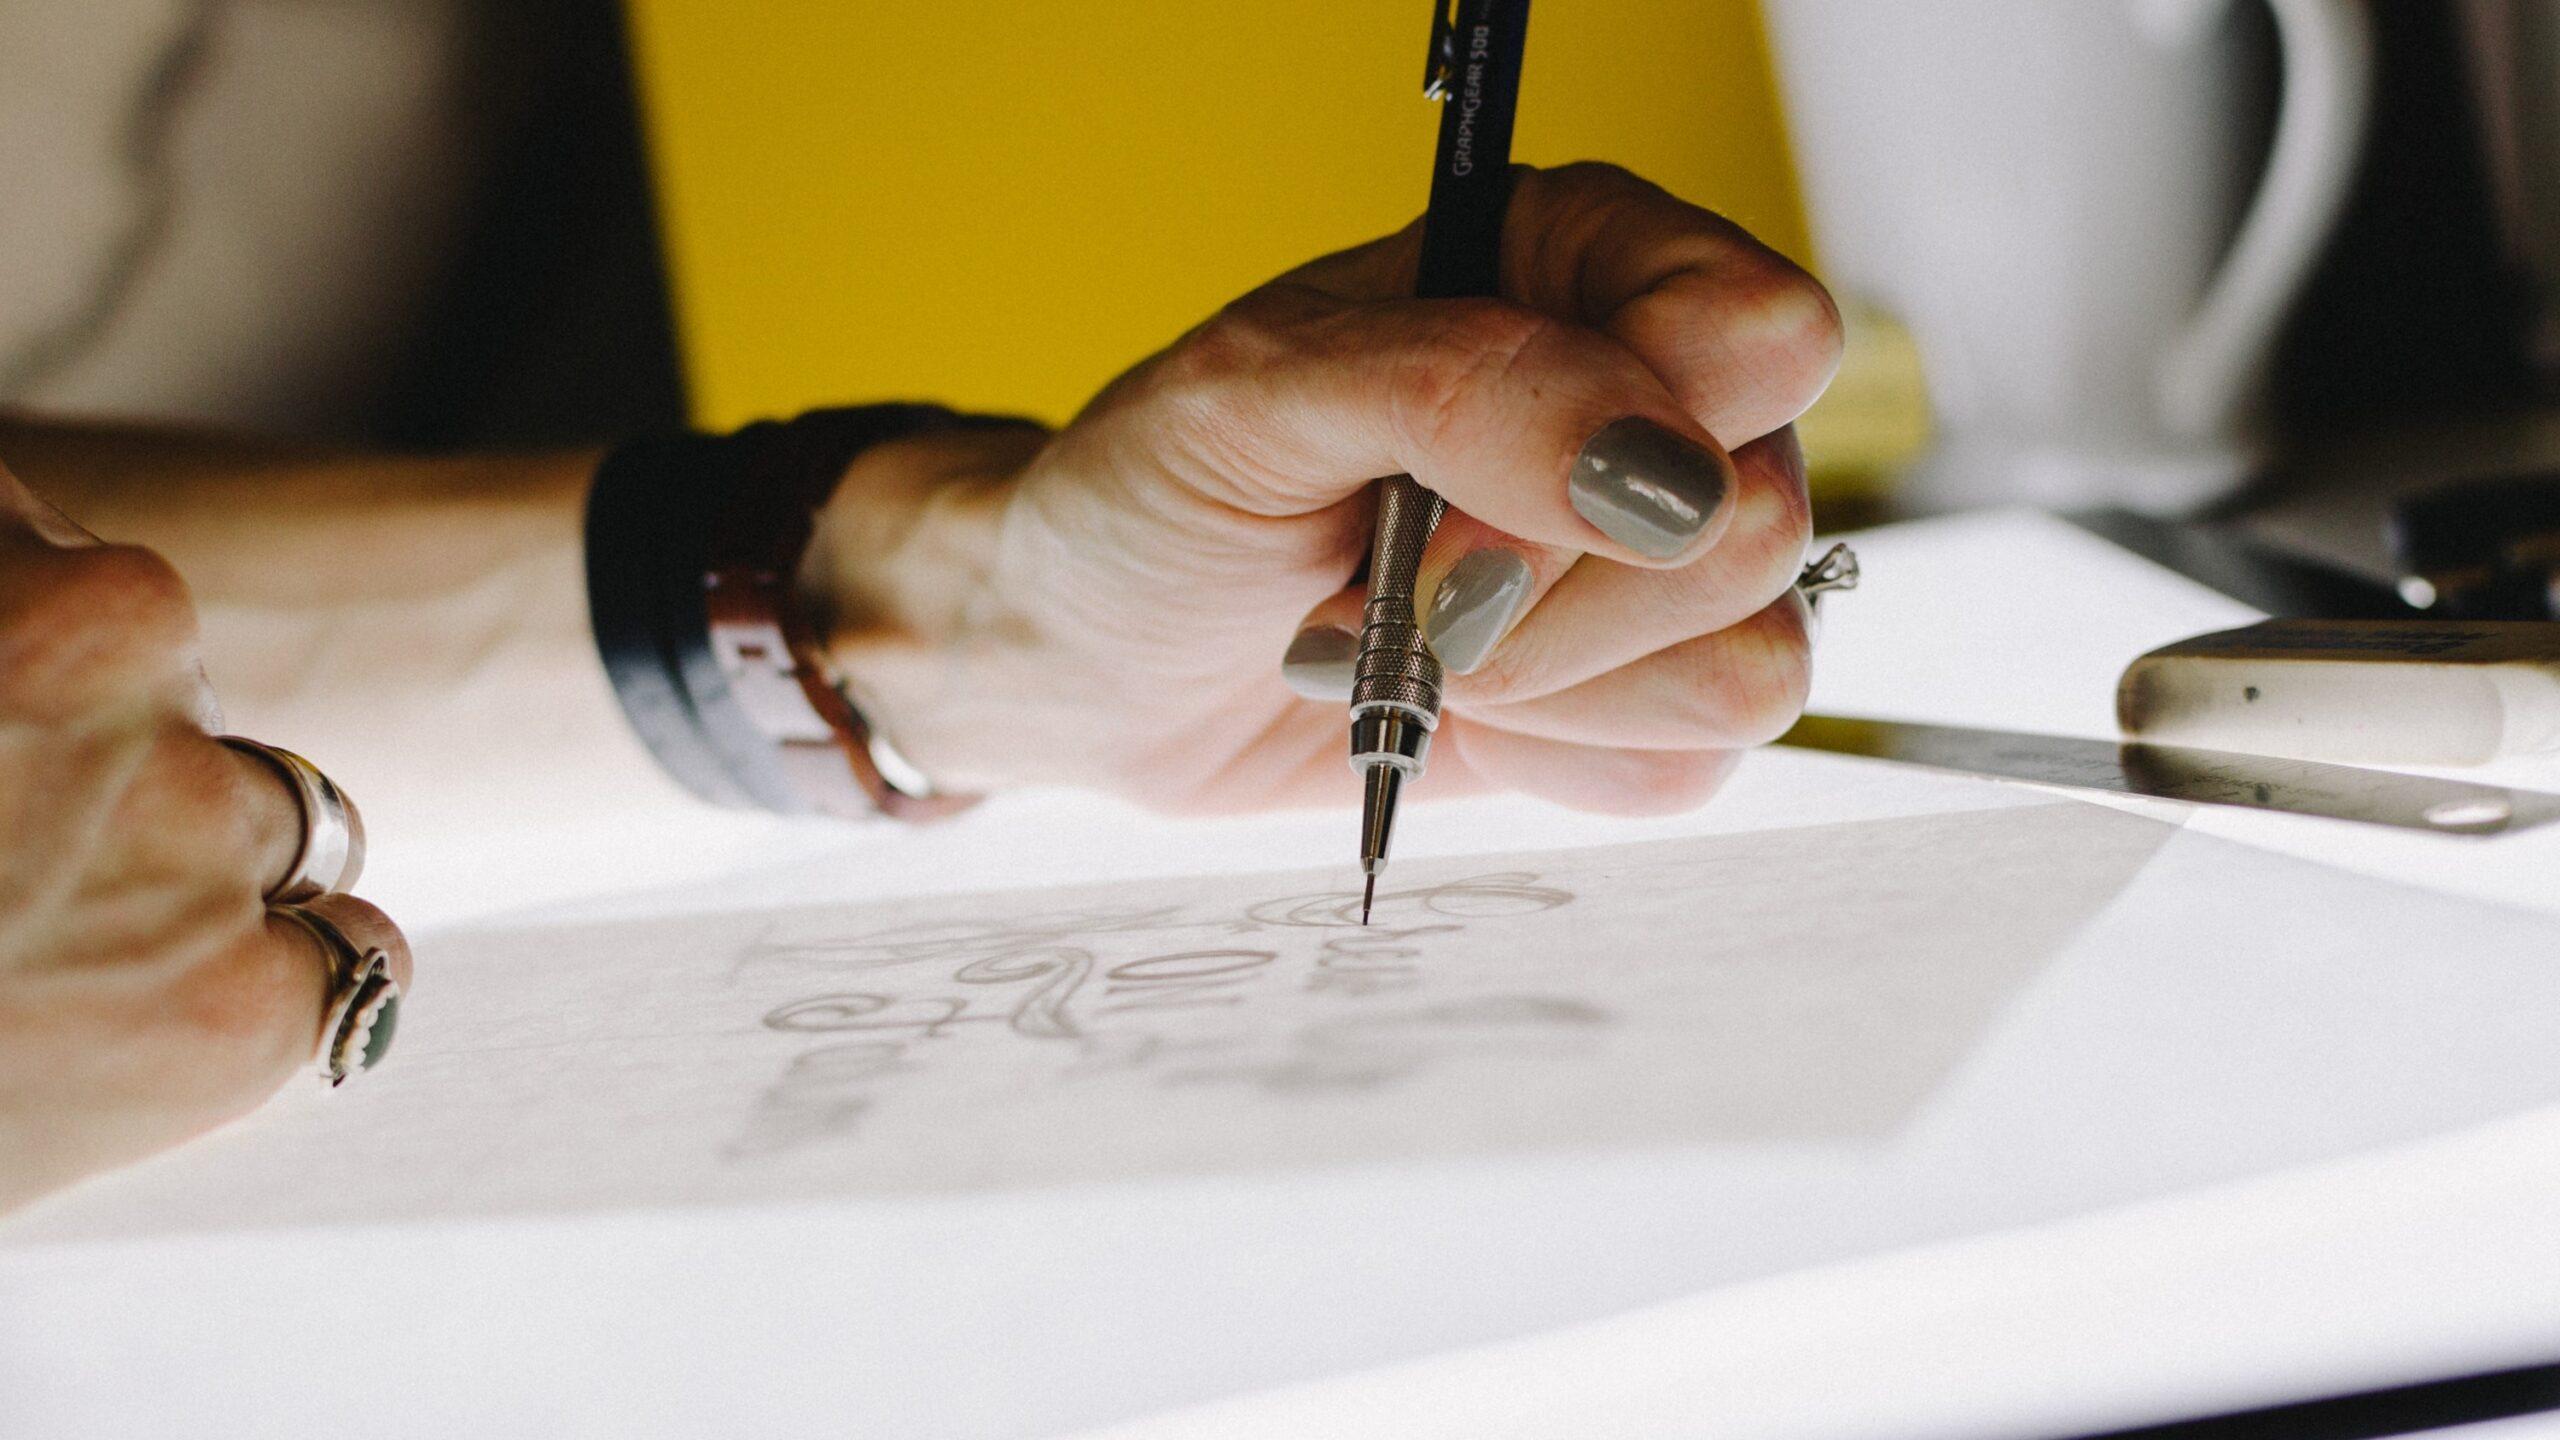 Close up of a person holding a drawing instrument to create an illustration or graphic on a piece of paper.